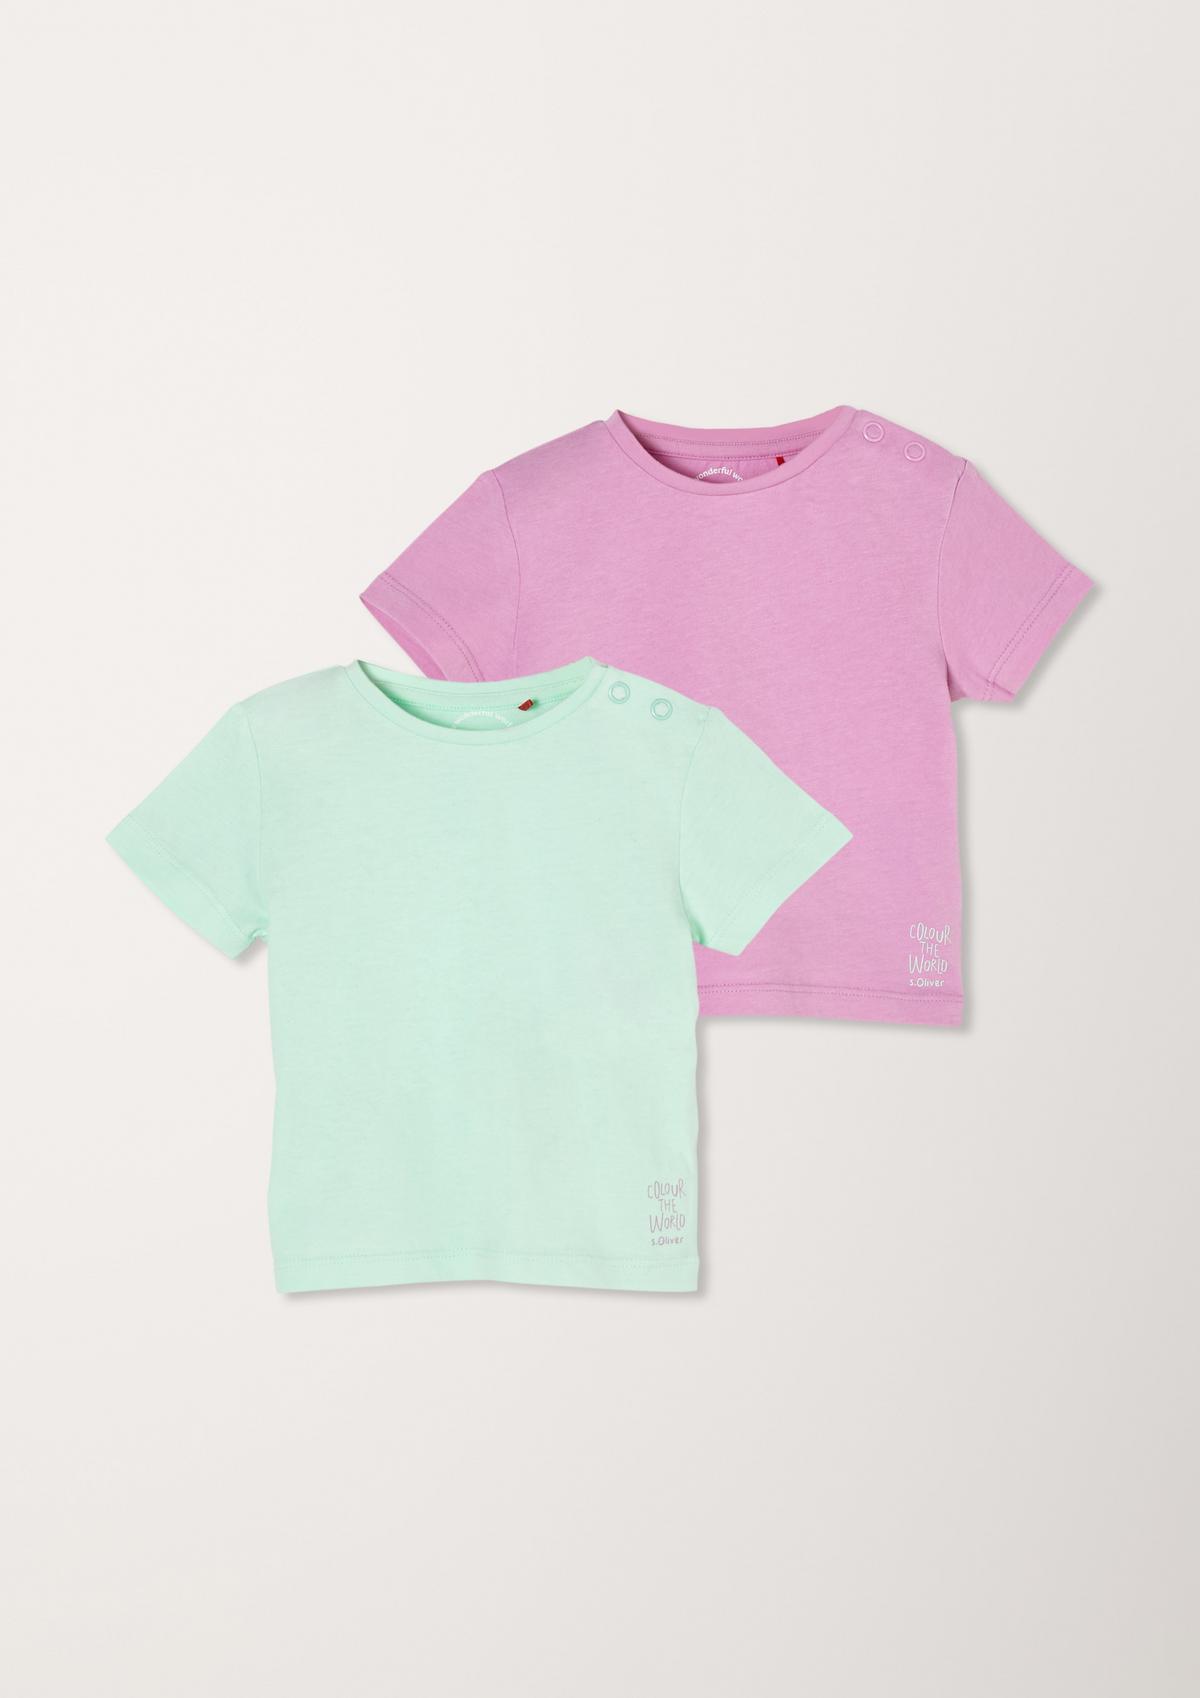 s.Oliver Cotton T-shirt in a double pack